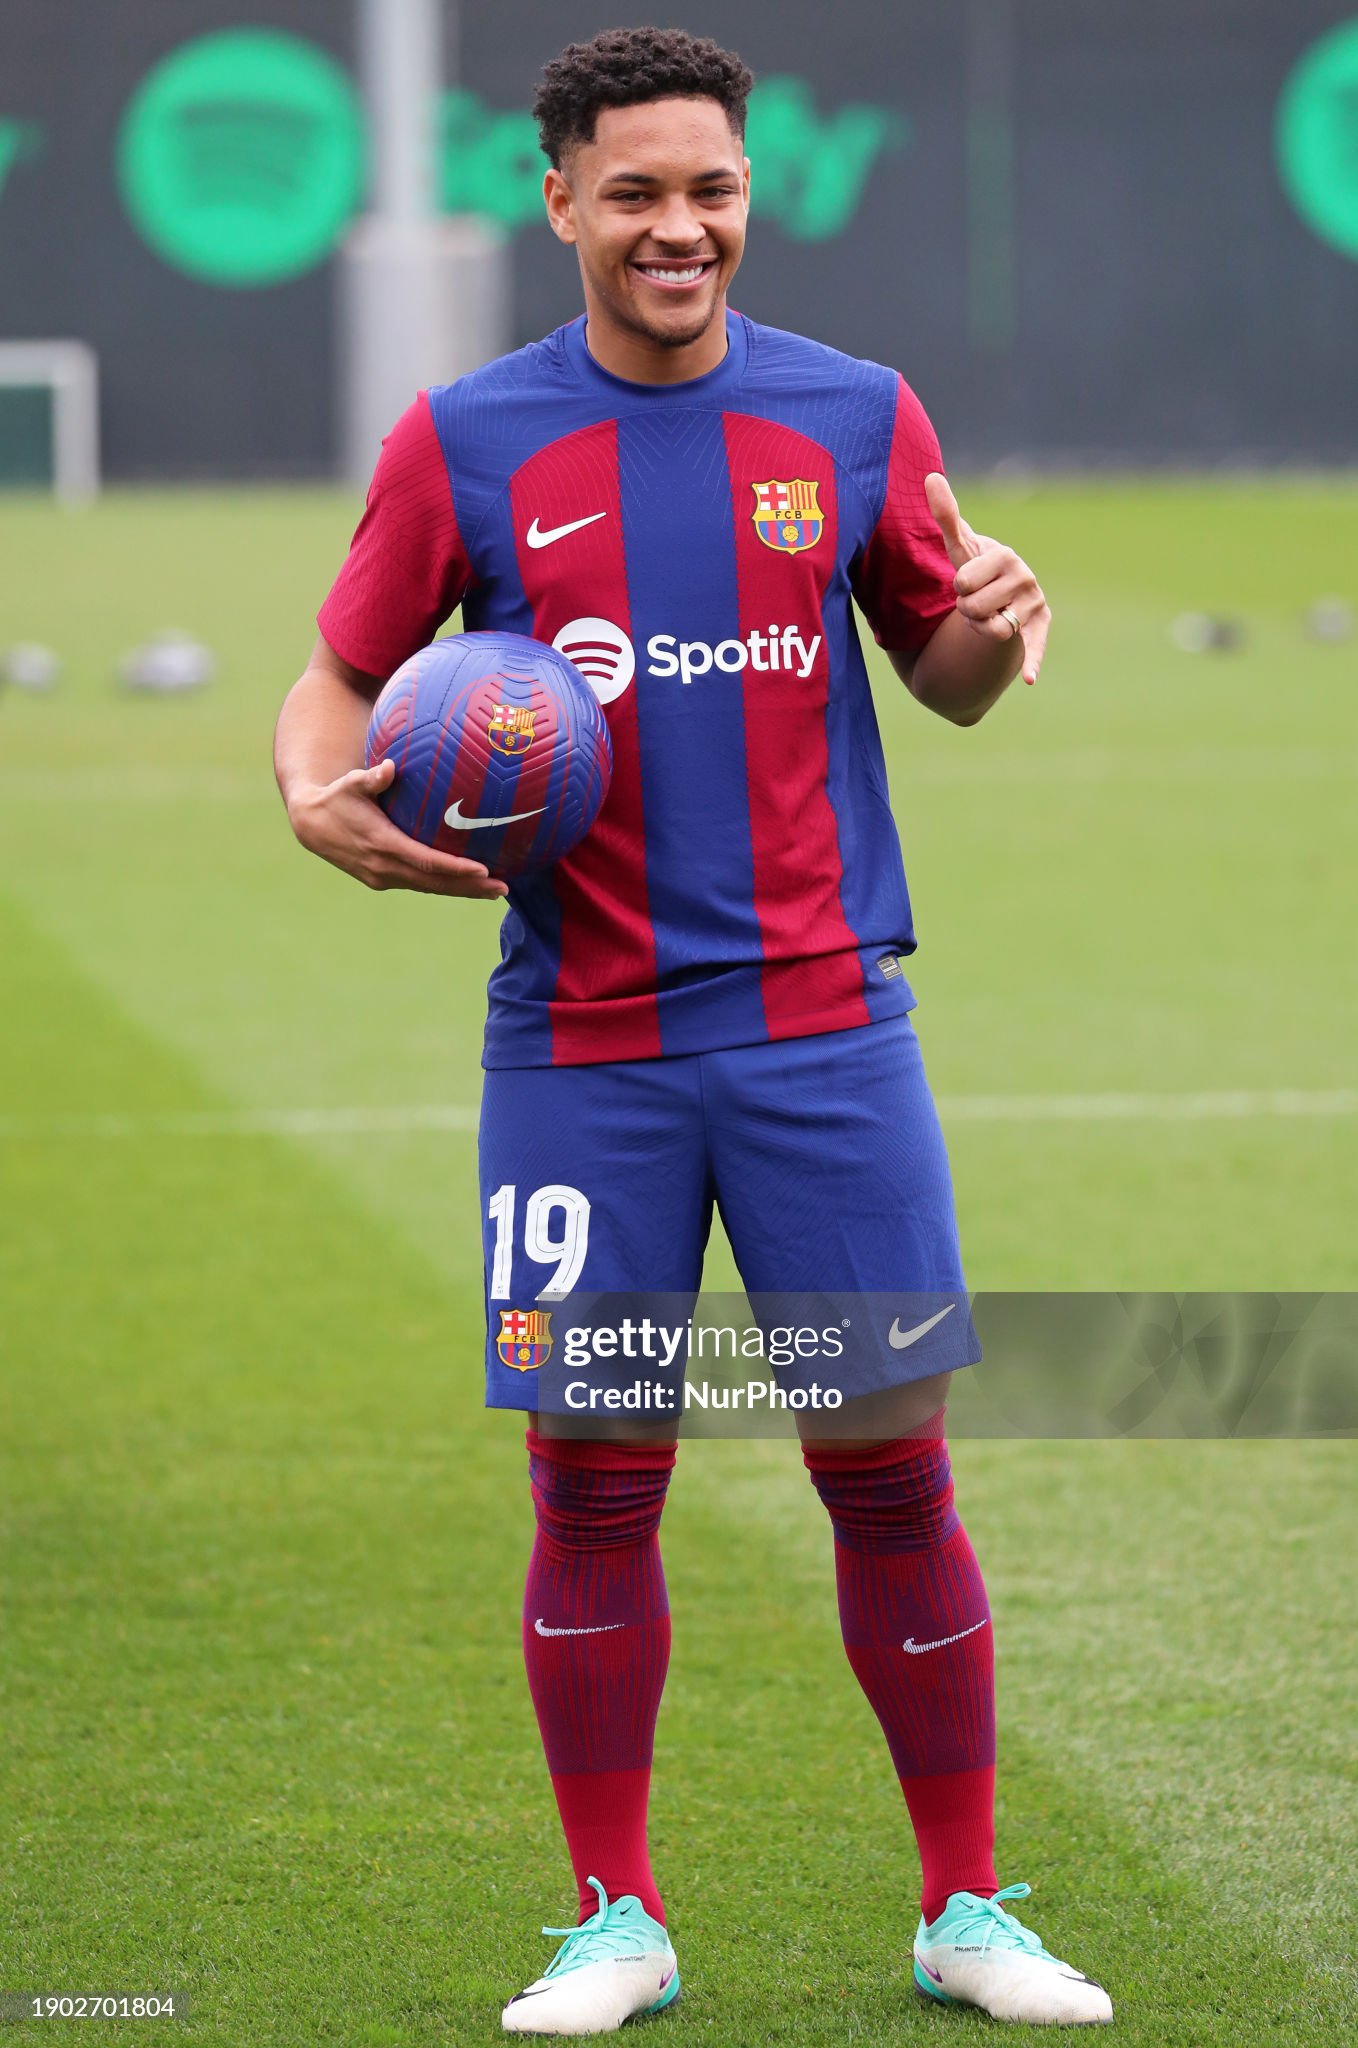 ¿Cuánto mide Vitor Roque? - Altura - Real height Victor-roque-is-being-presented-as-a-new-fc-barcelona-player-in-barcelona-spain-on-january-5